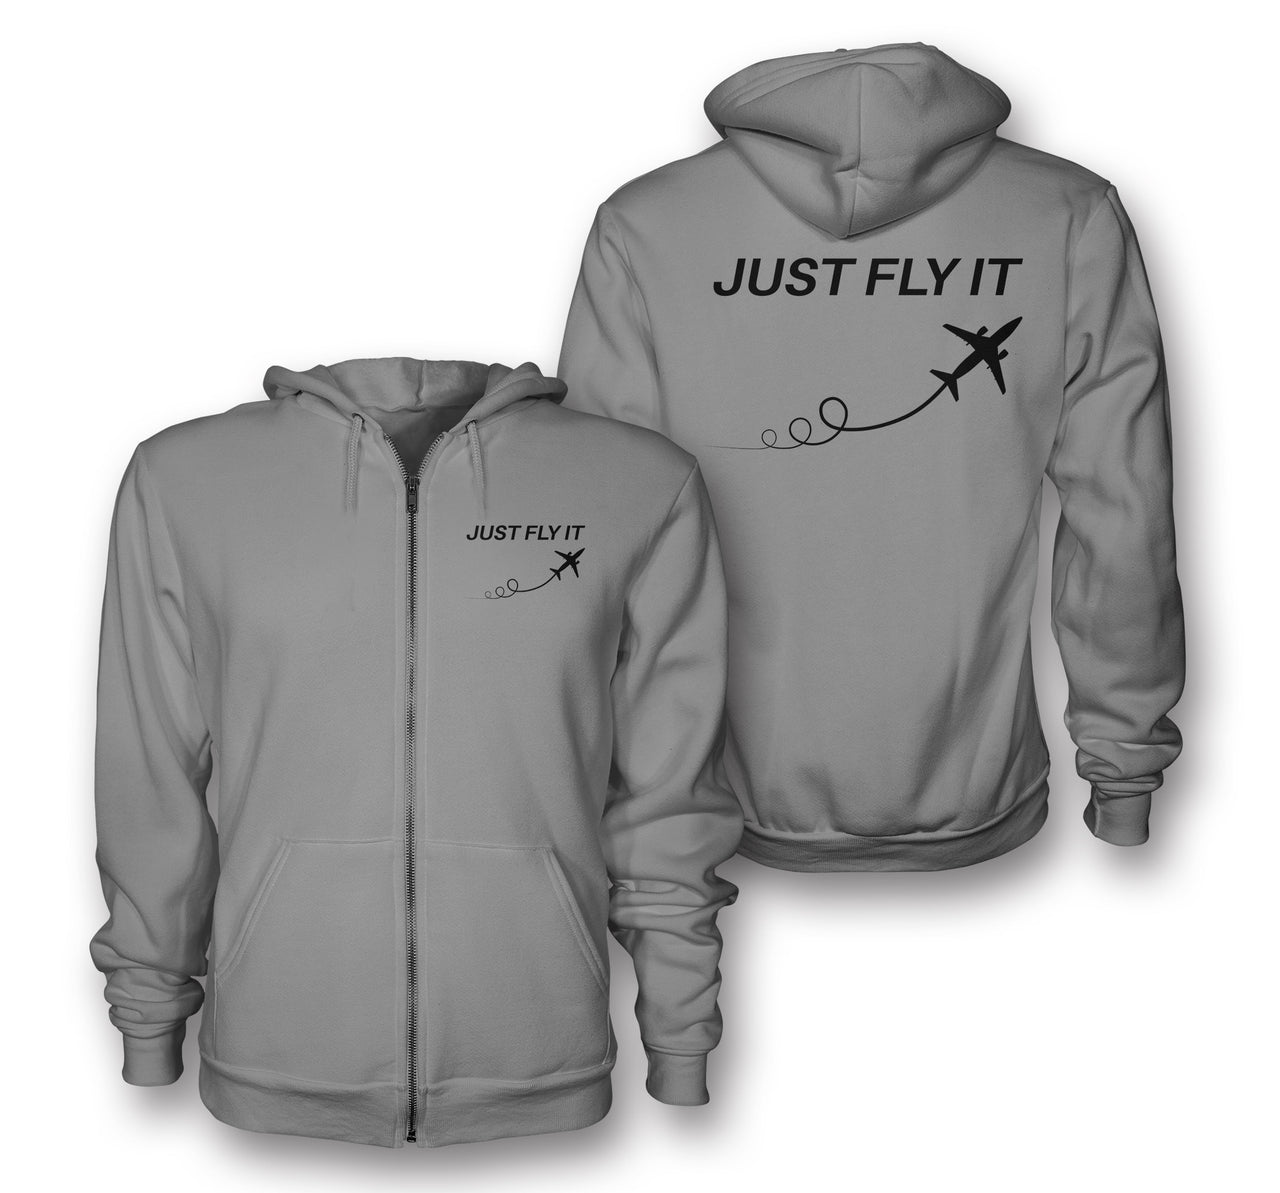 Just Fly It Designed Zipped Hoodies